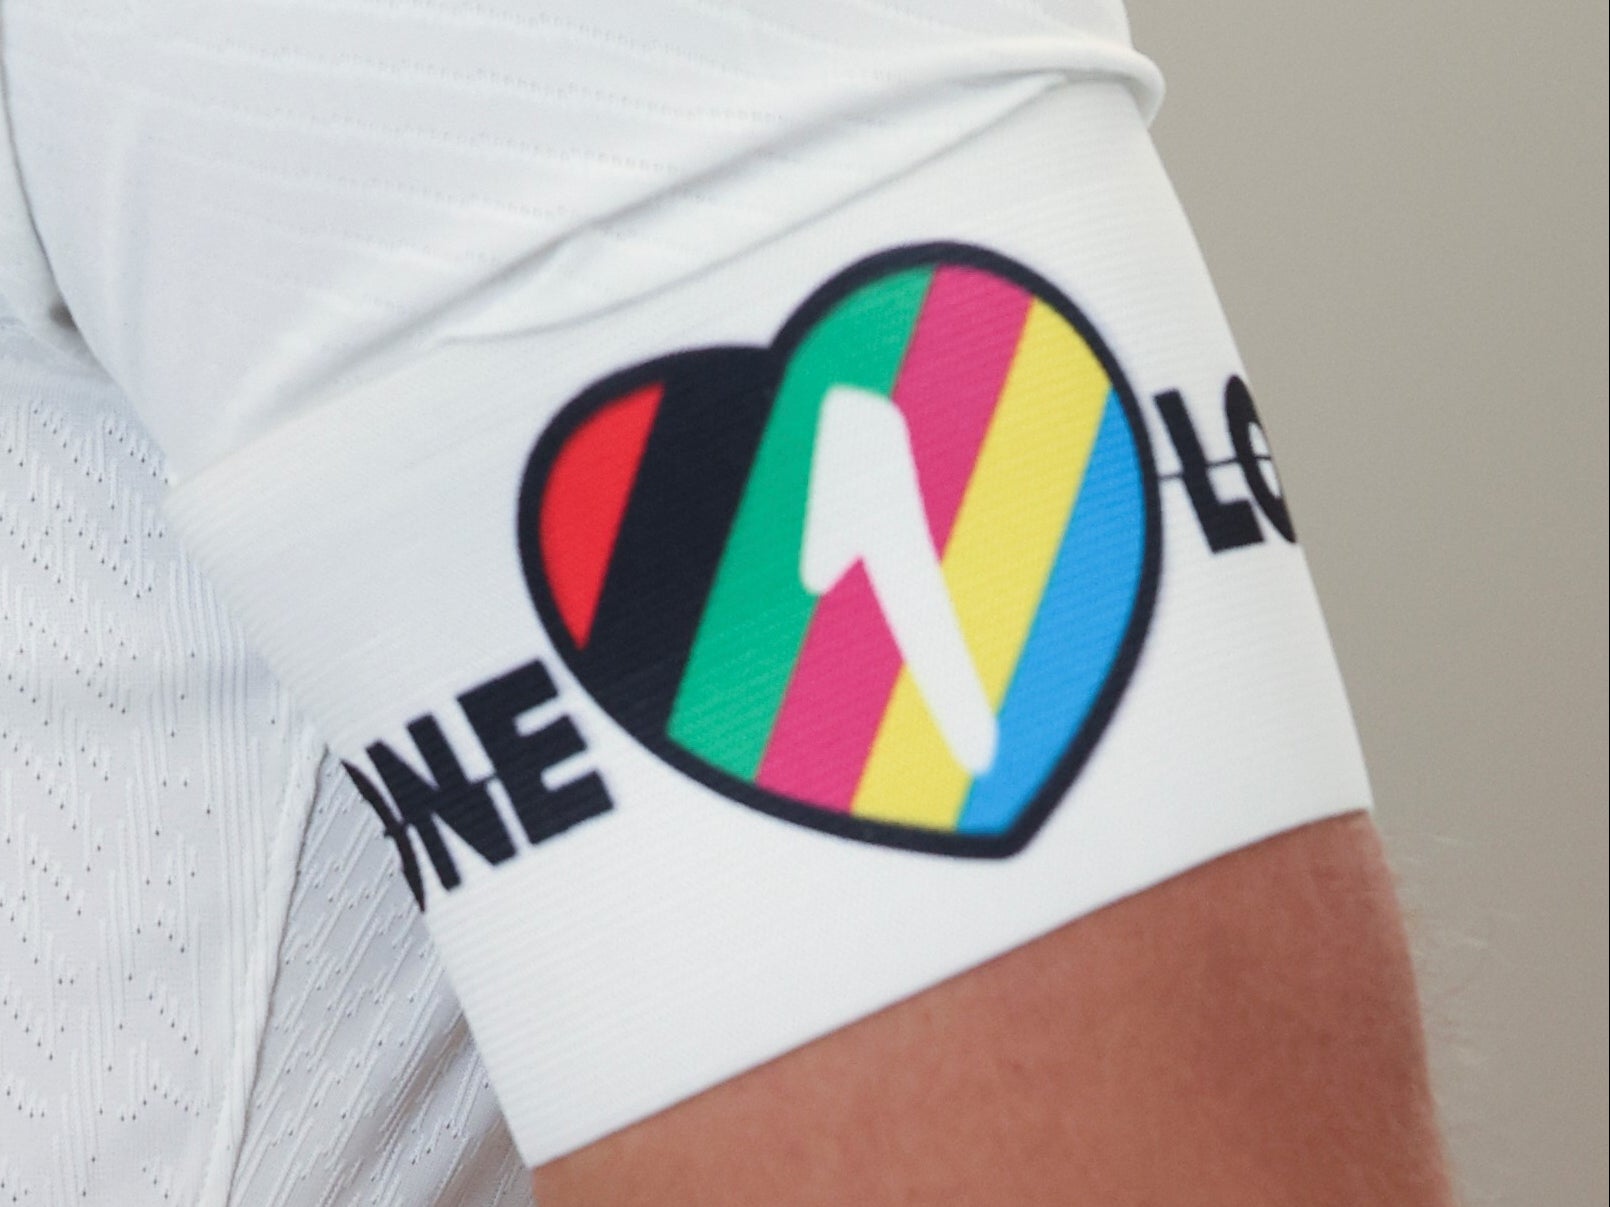 The OneLove armband that will be worn at the Qatar World Cup